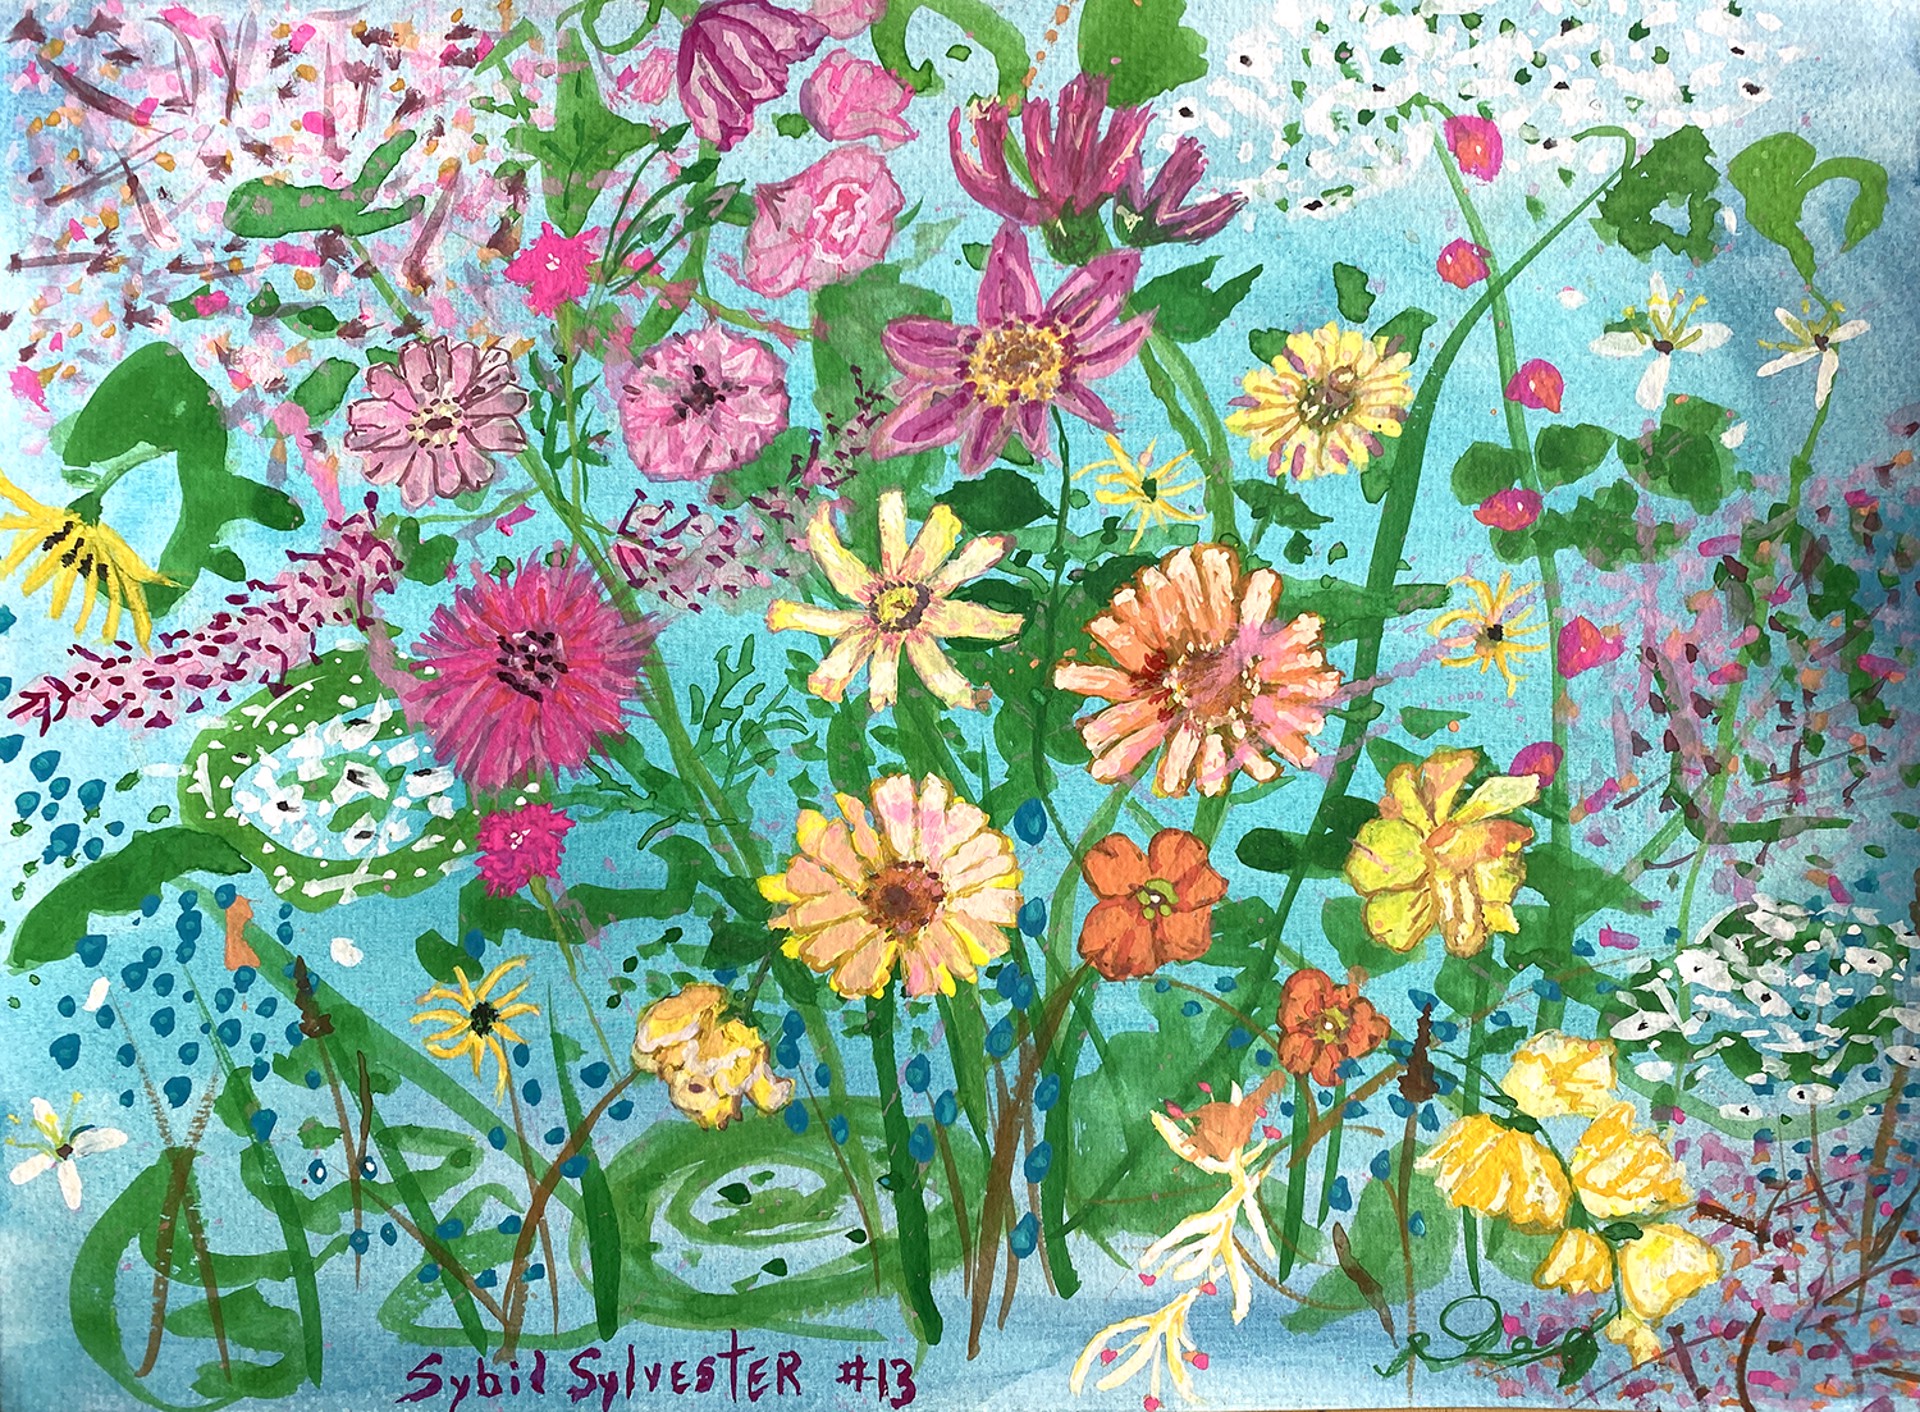 It's A Flower Jungle Out There! by Sybil Sylvester